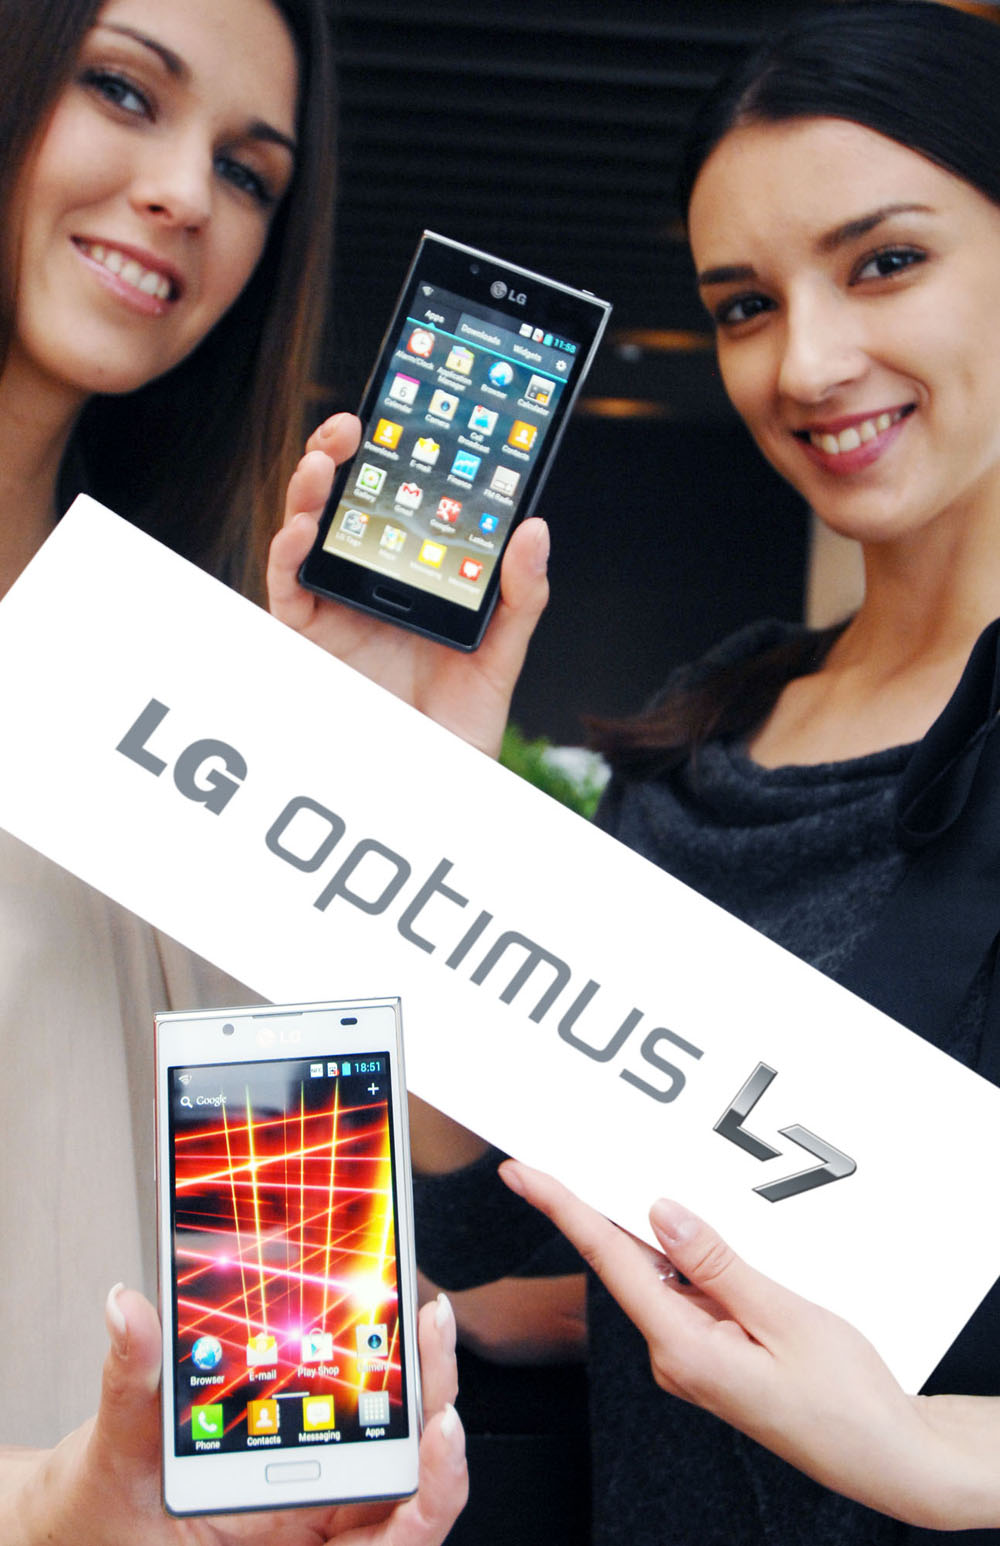 Another image of two female models holding the LG OPTIMUS L7 smartphone and its brand name panel at the launch event